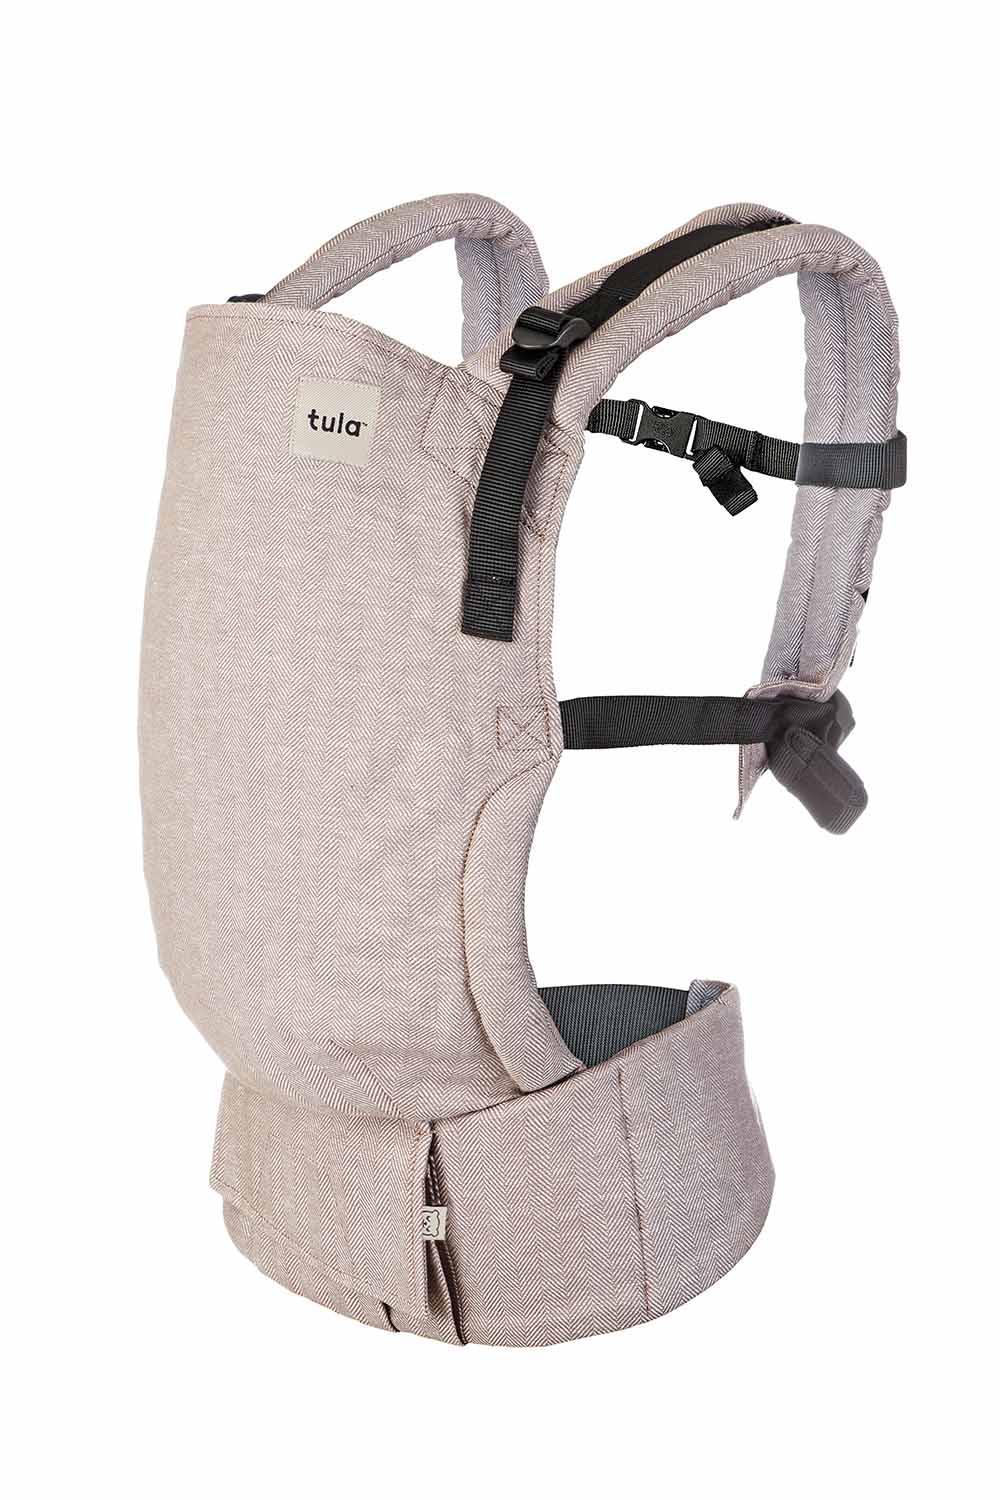 Sand Linen – Tula Toddler Carrier - Tula US – Baby Tula US